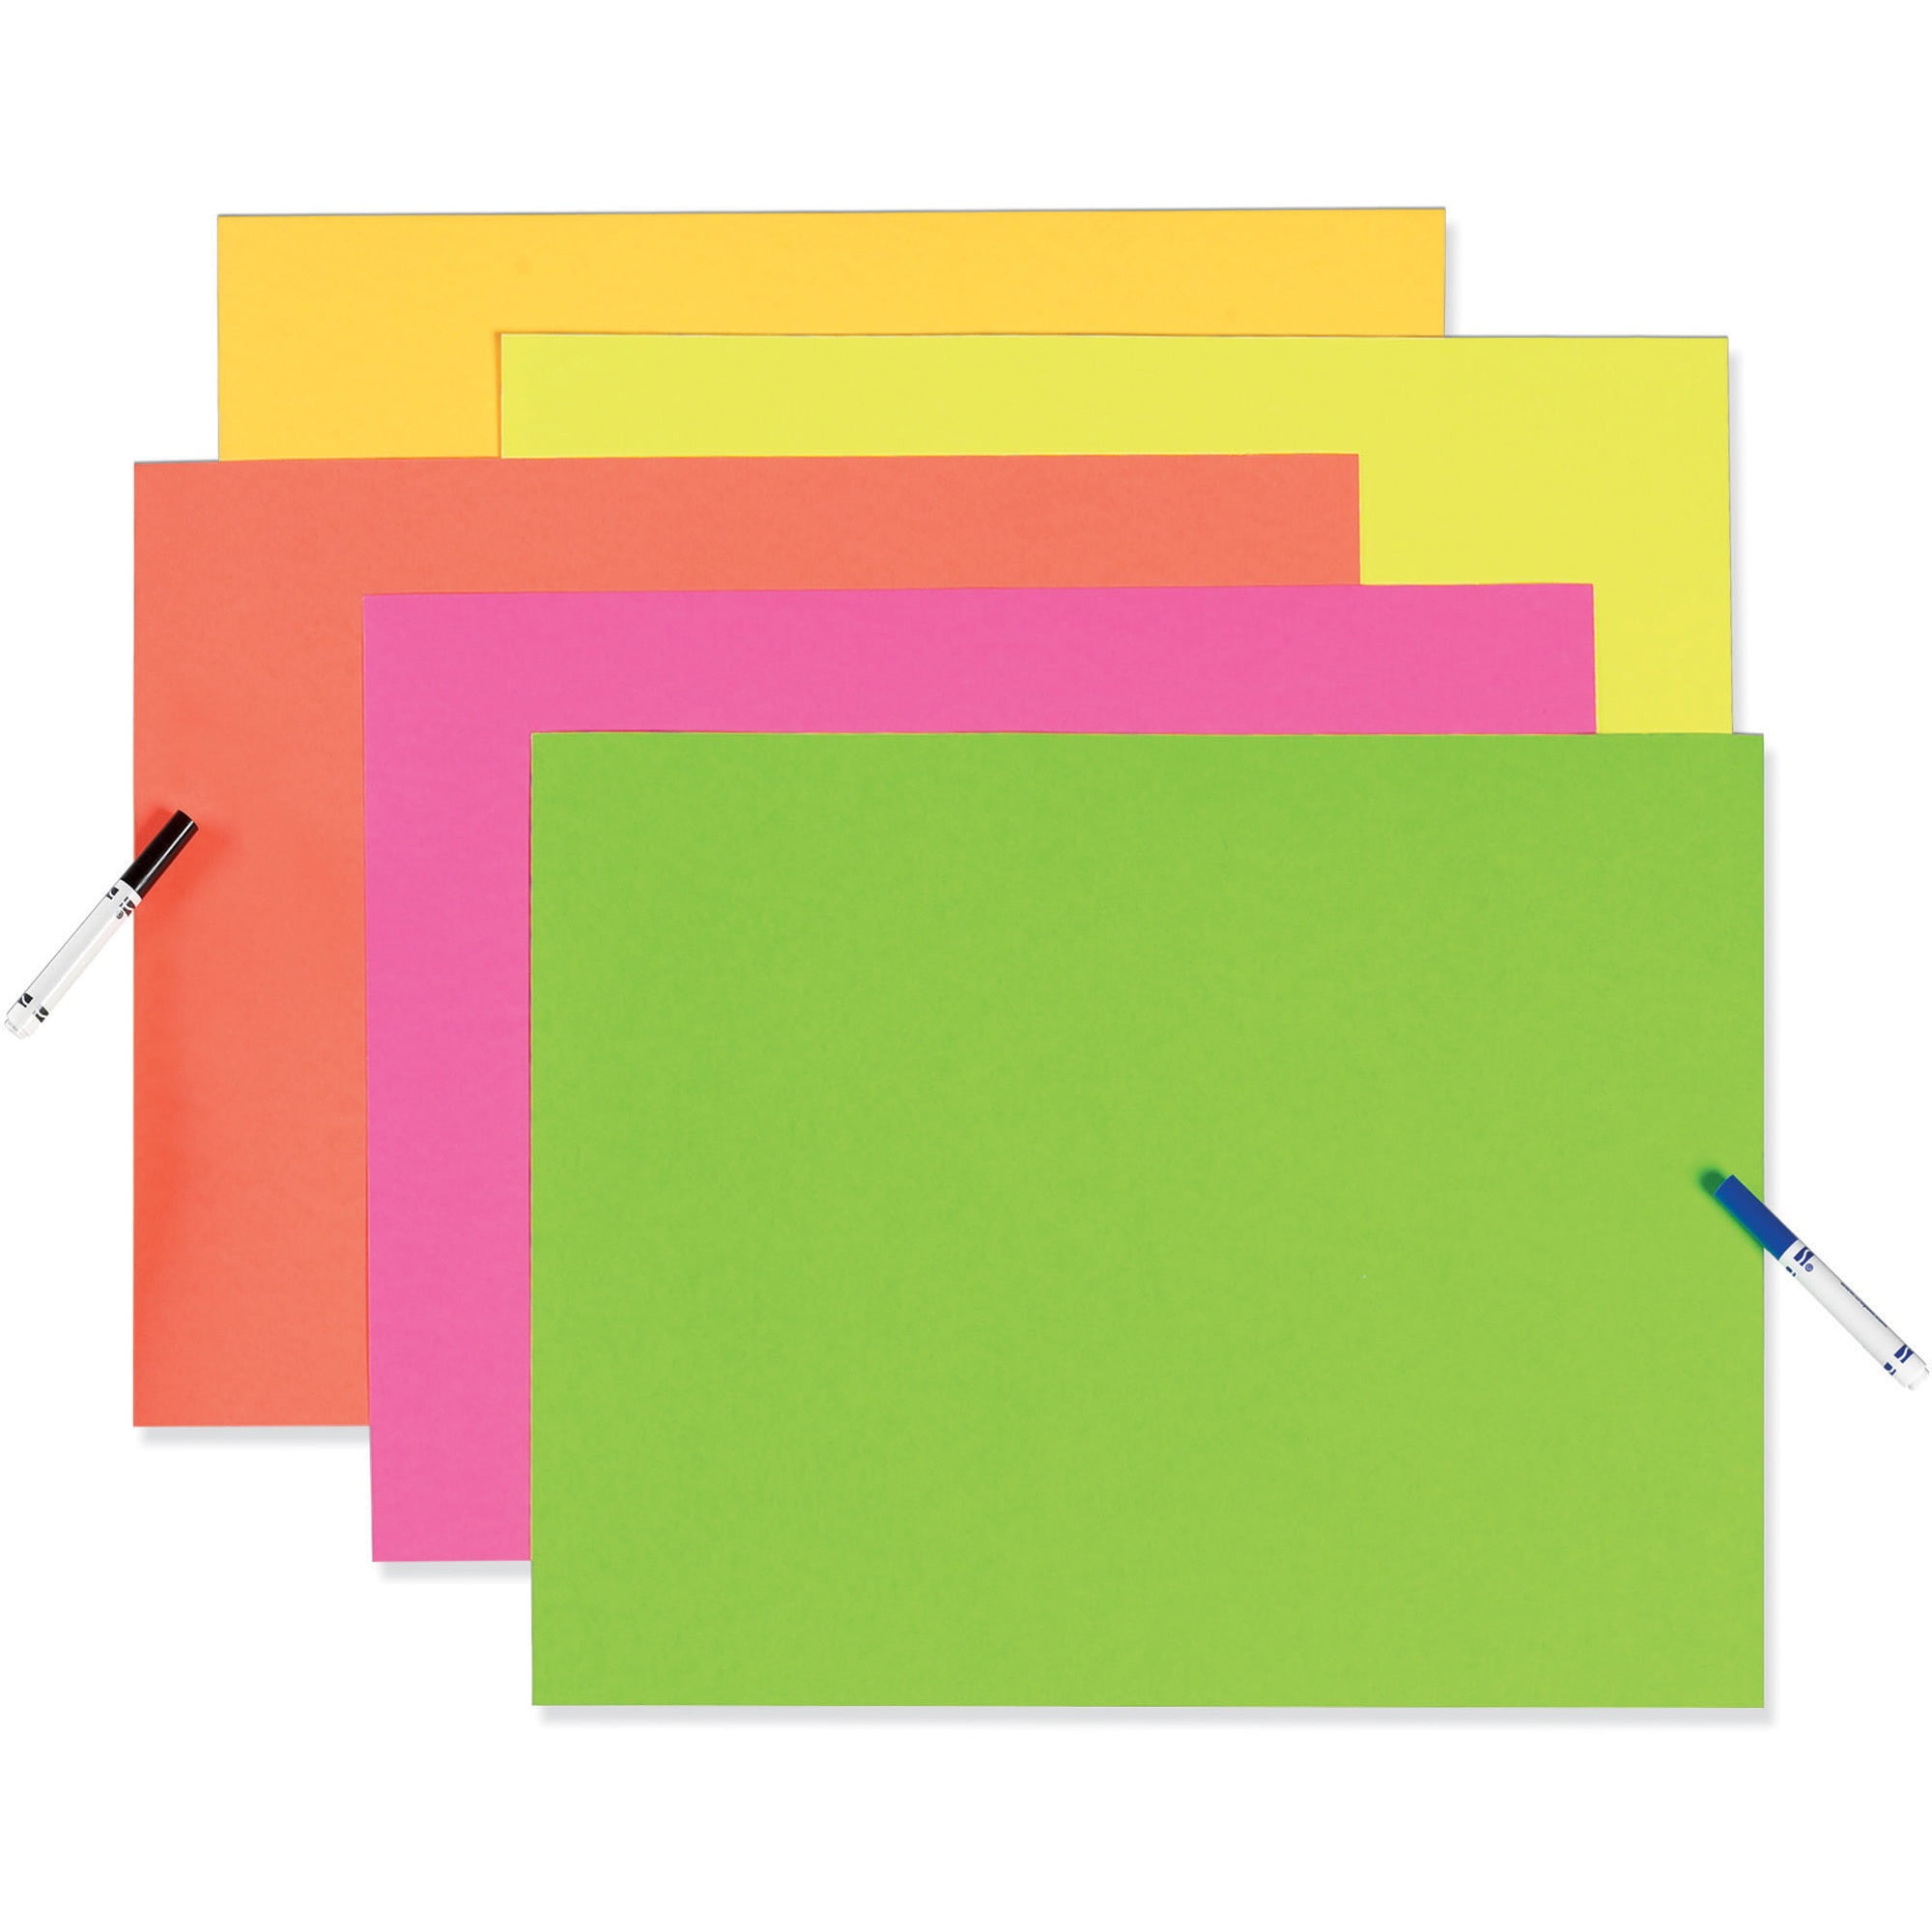 22x28 Poster Board 4 Ply 25/Ct PAC104234 Assorted Neon Colors 